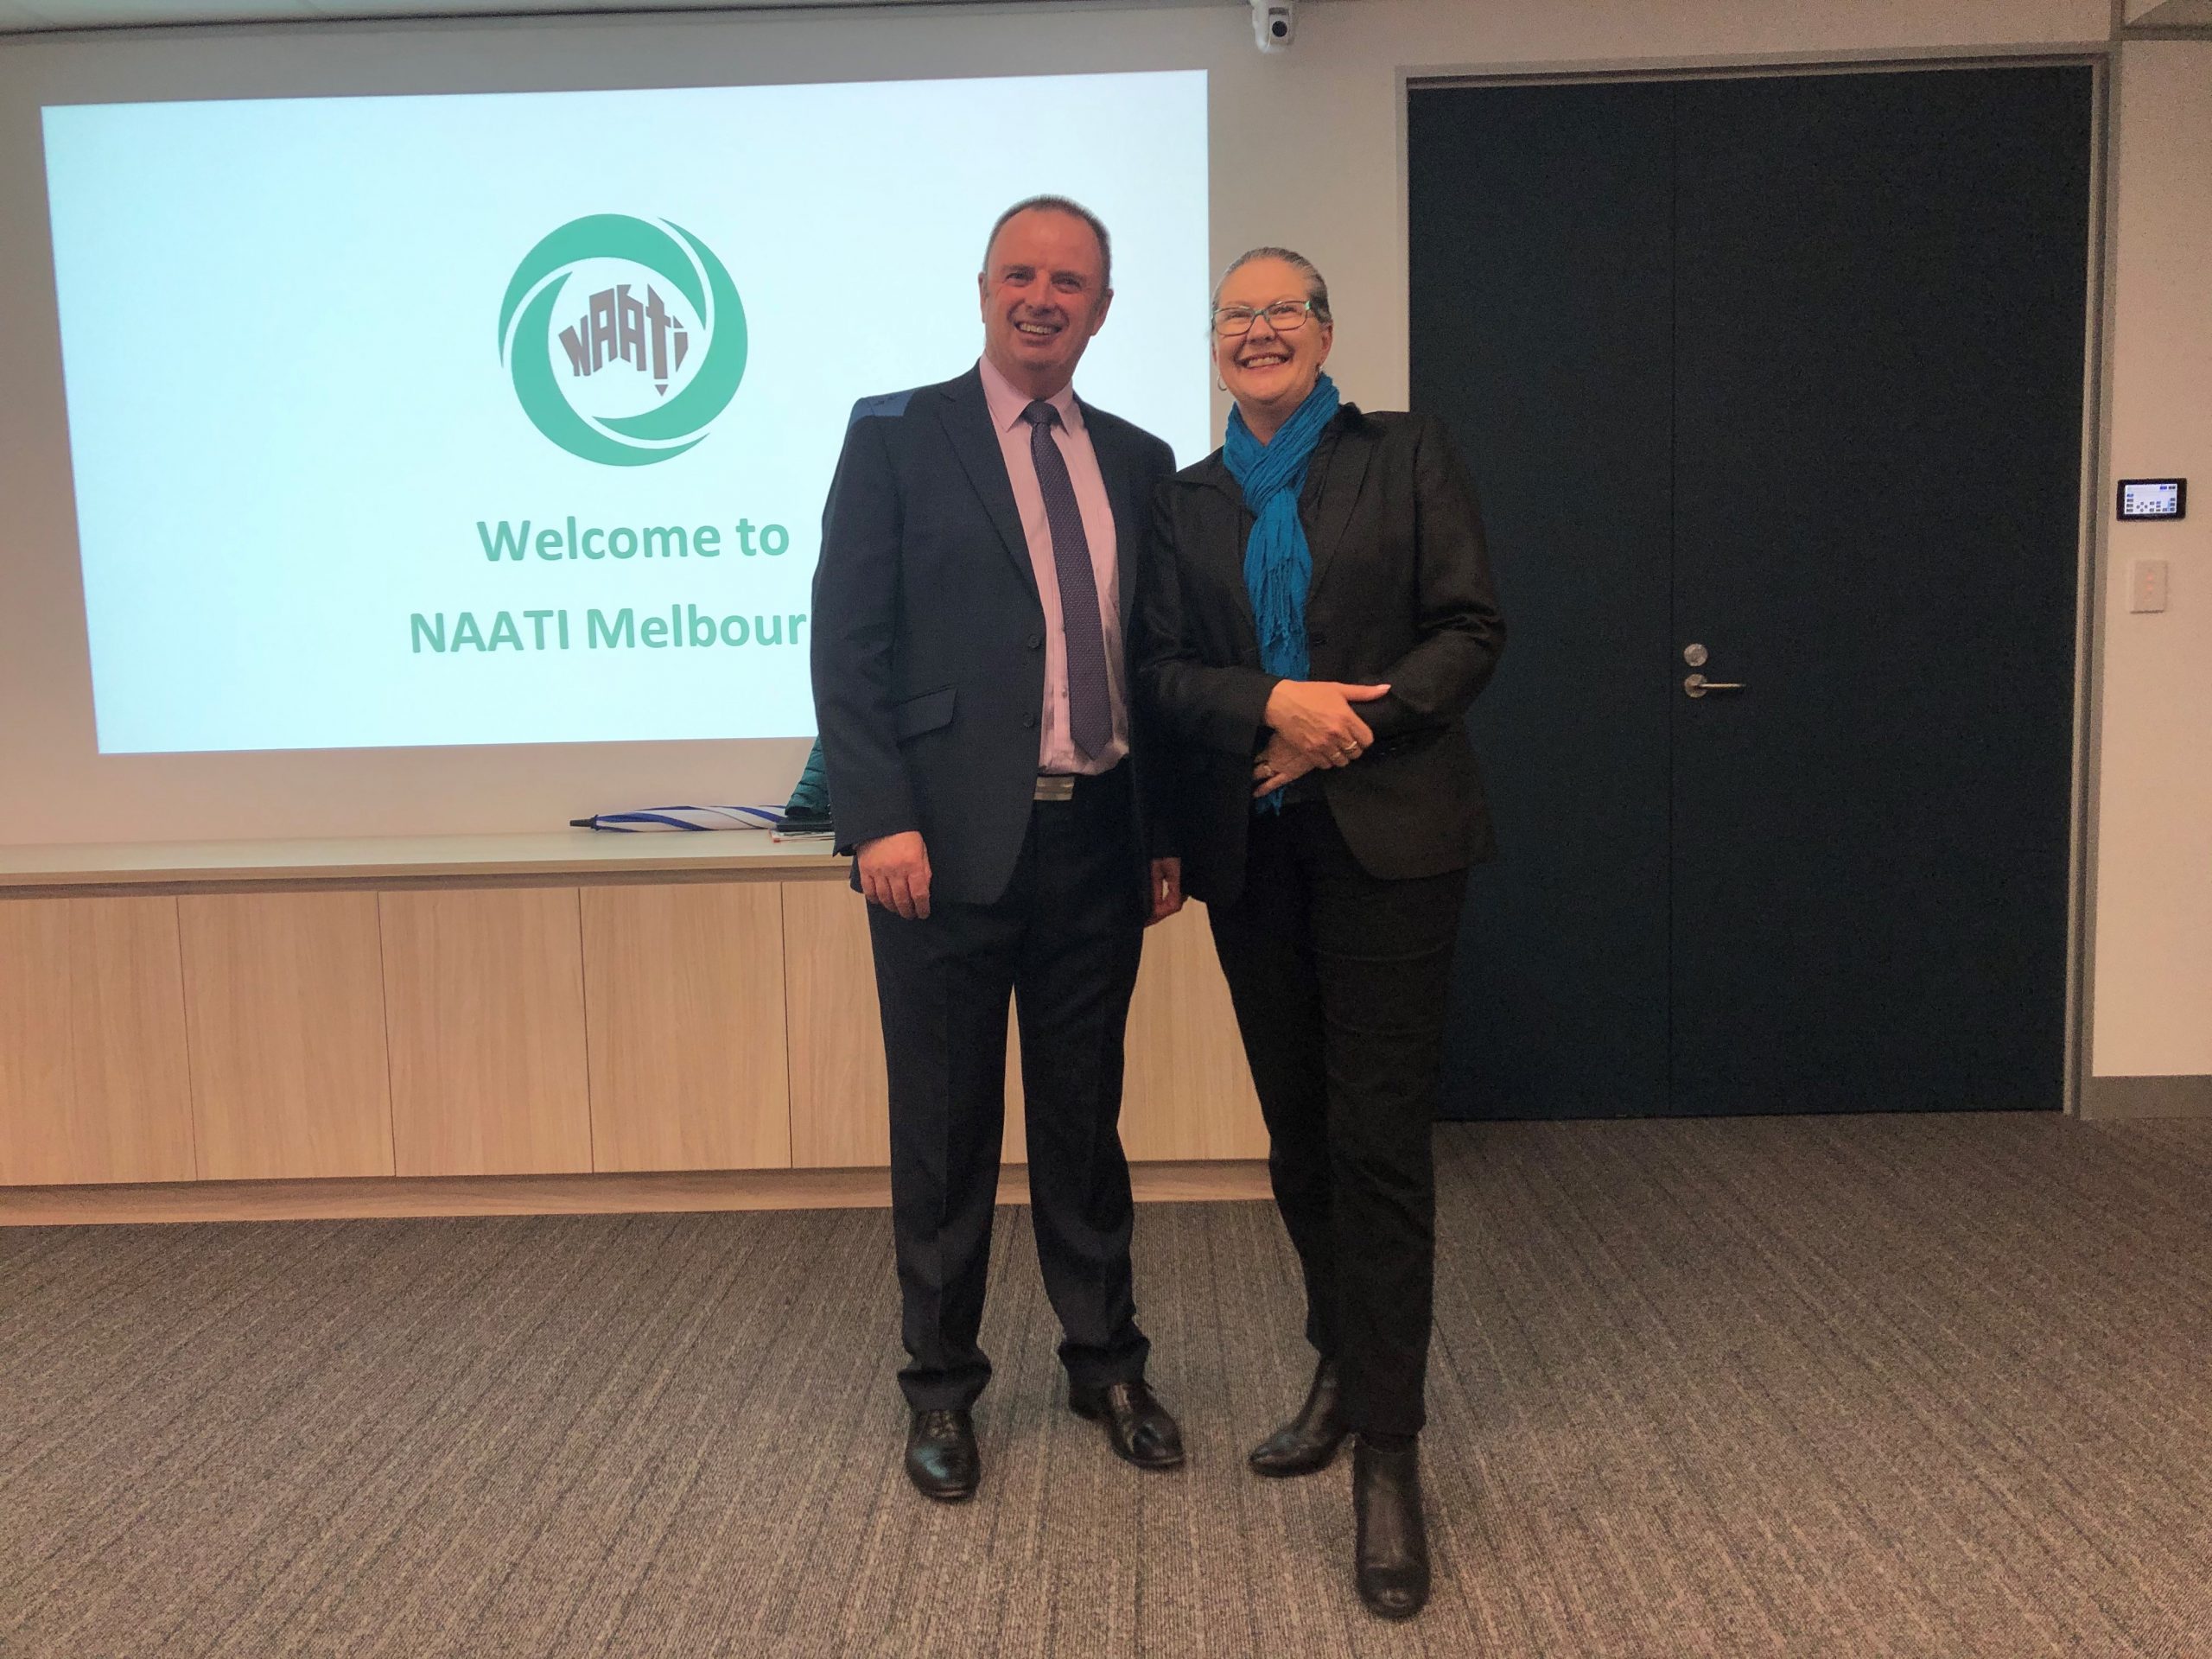 ASLIA attended the opening of the new NAATI office in Melbourne!